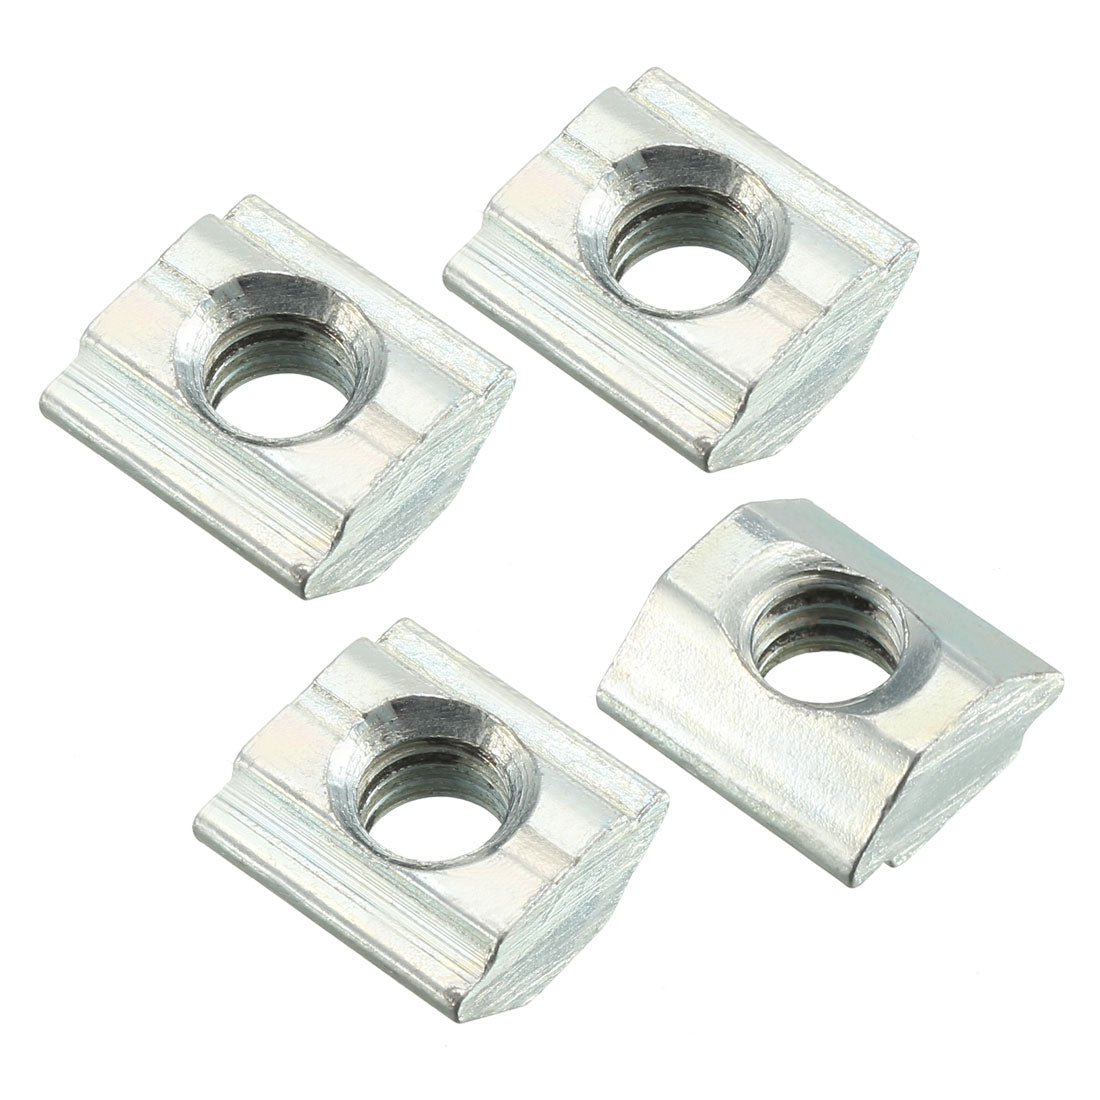 Uxcell Uxcell Slide in T-Nut, M8 Threaded for 3030 Series Aluminum Extrusions Profile 8pcs